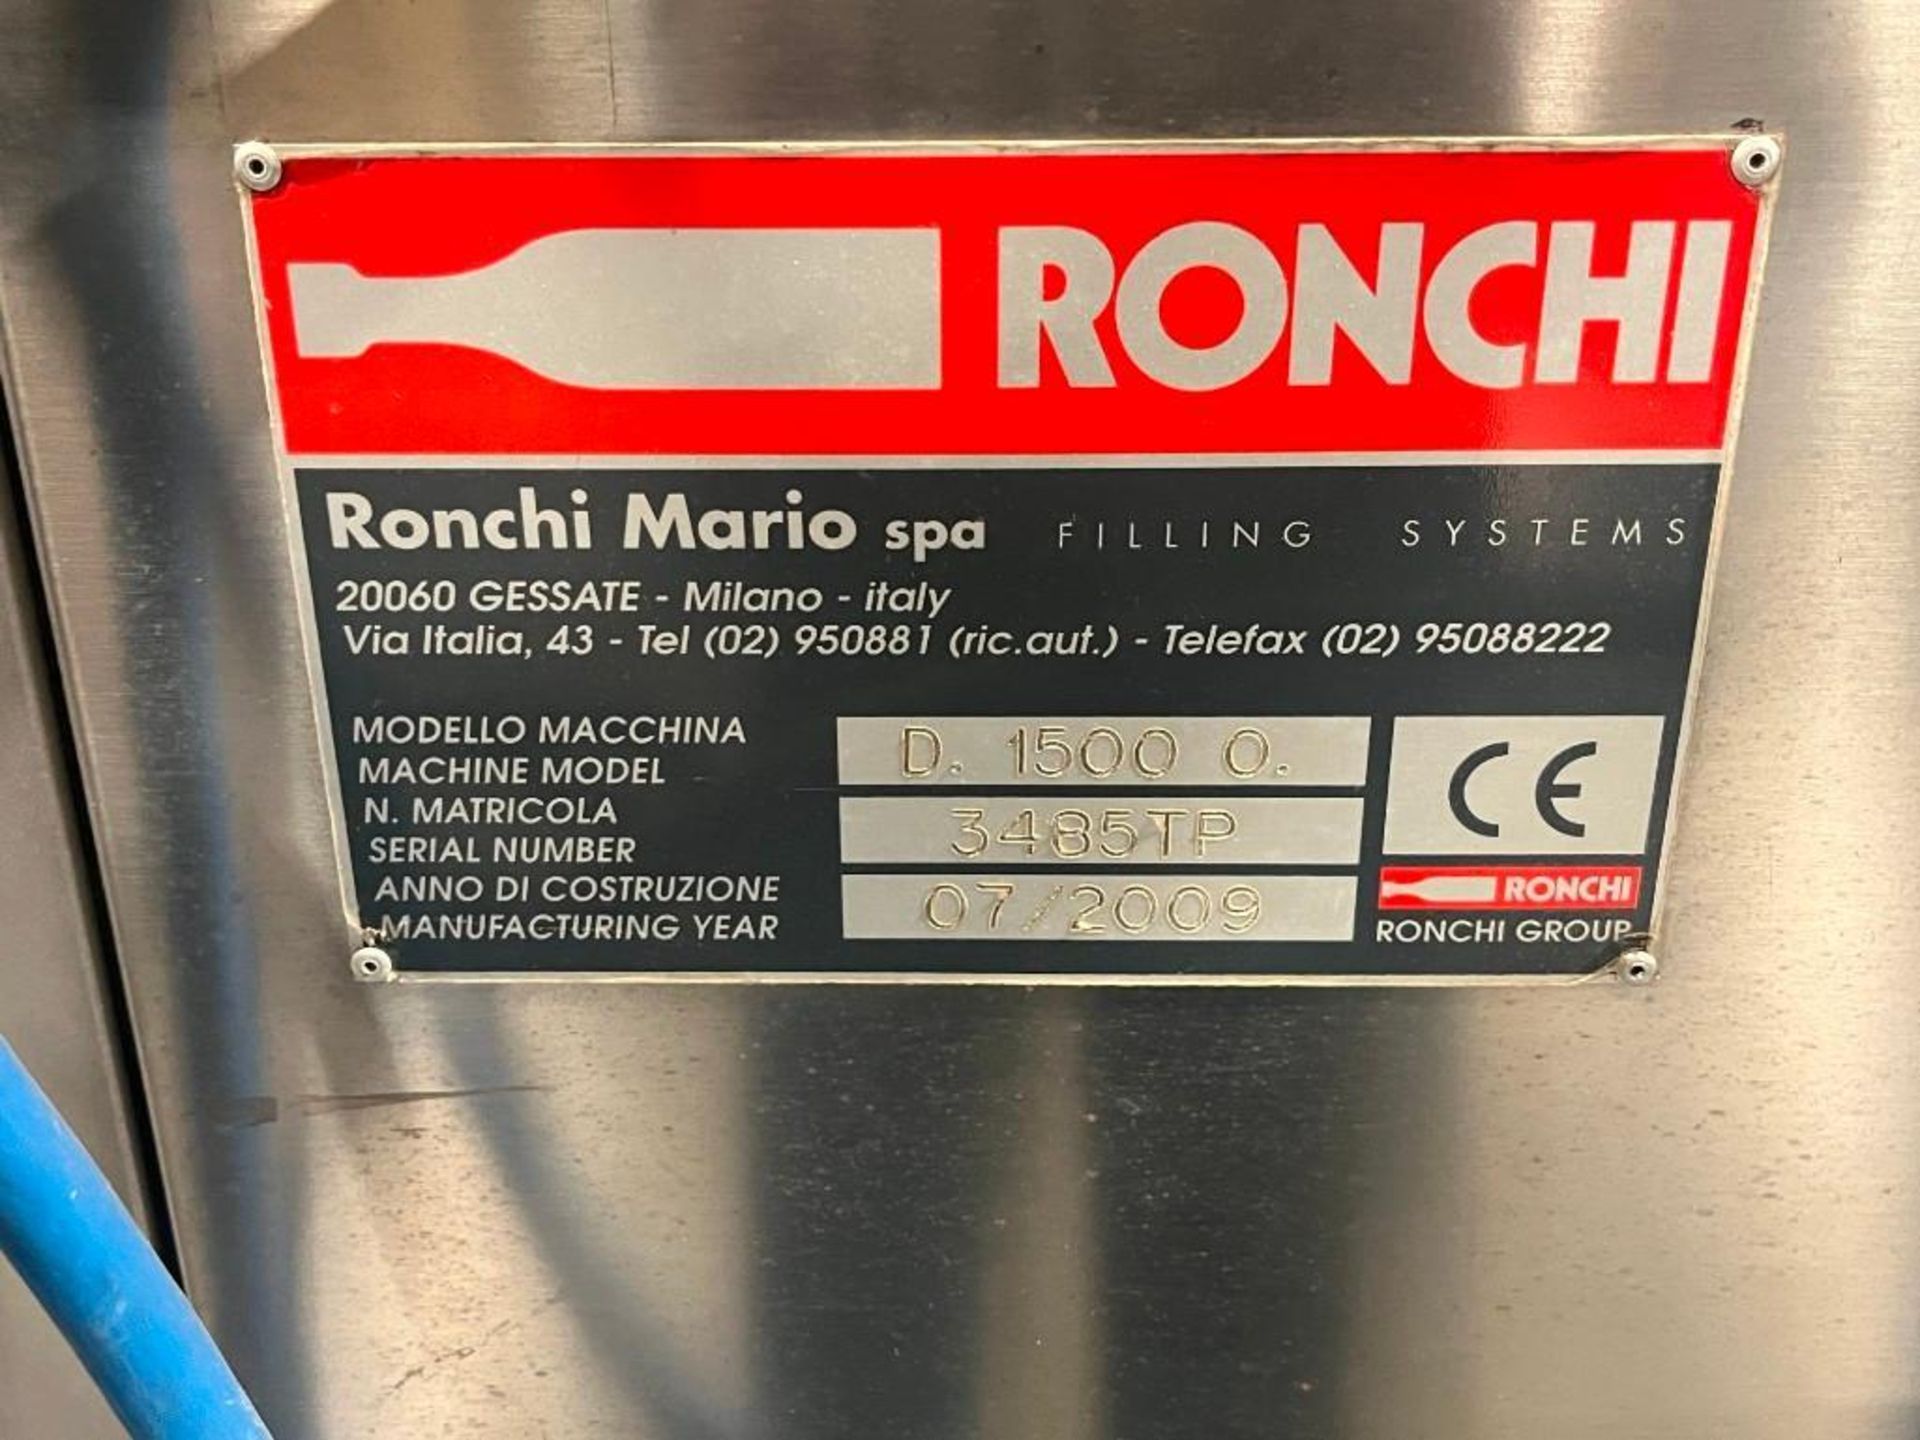 Ronchi 8-Head Rotary Chuck Capper, Model Sirio/PS/8/1, S/N: 3485/TP. Includes Ronchi centrifugal bow - Image 58 of 102